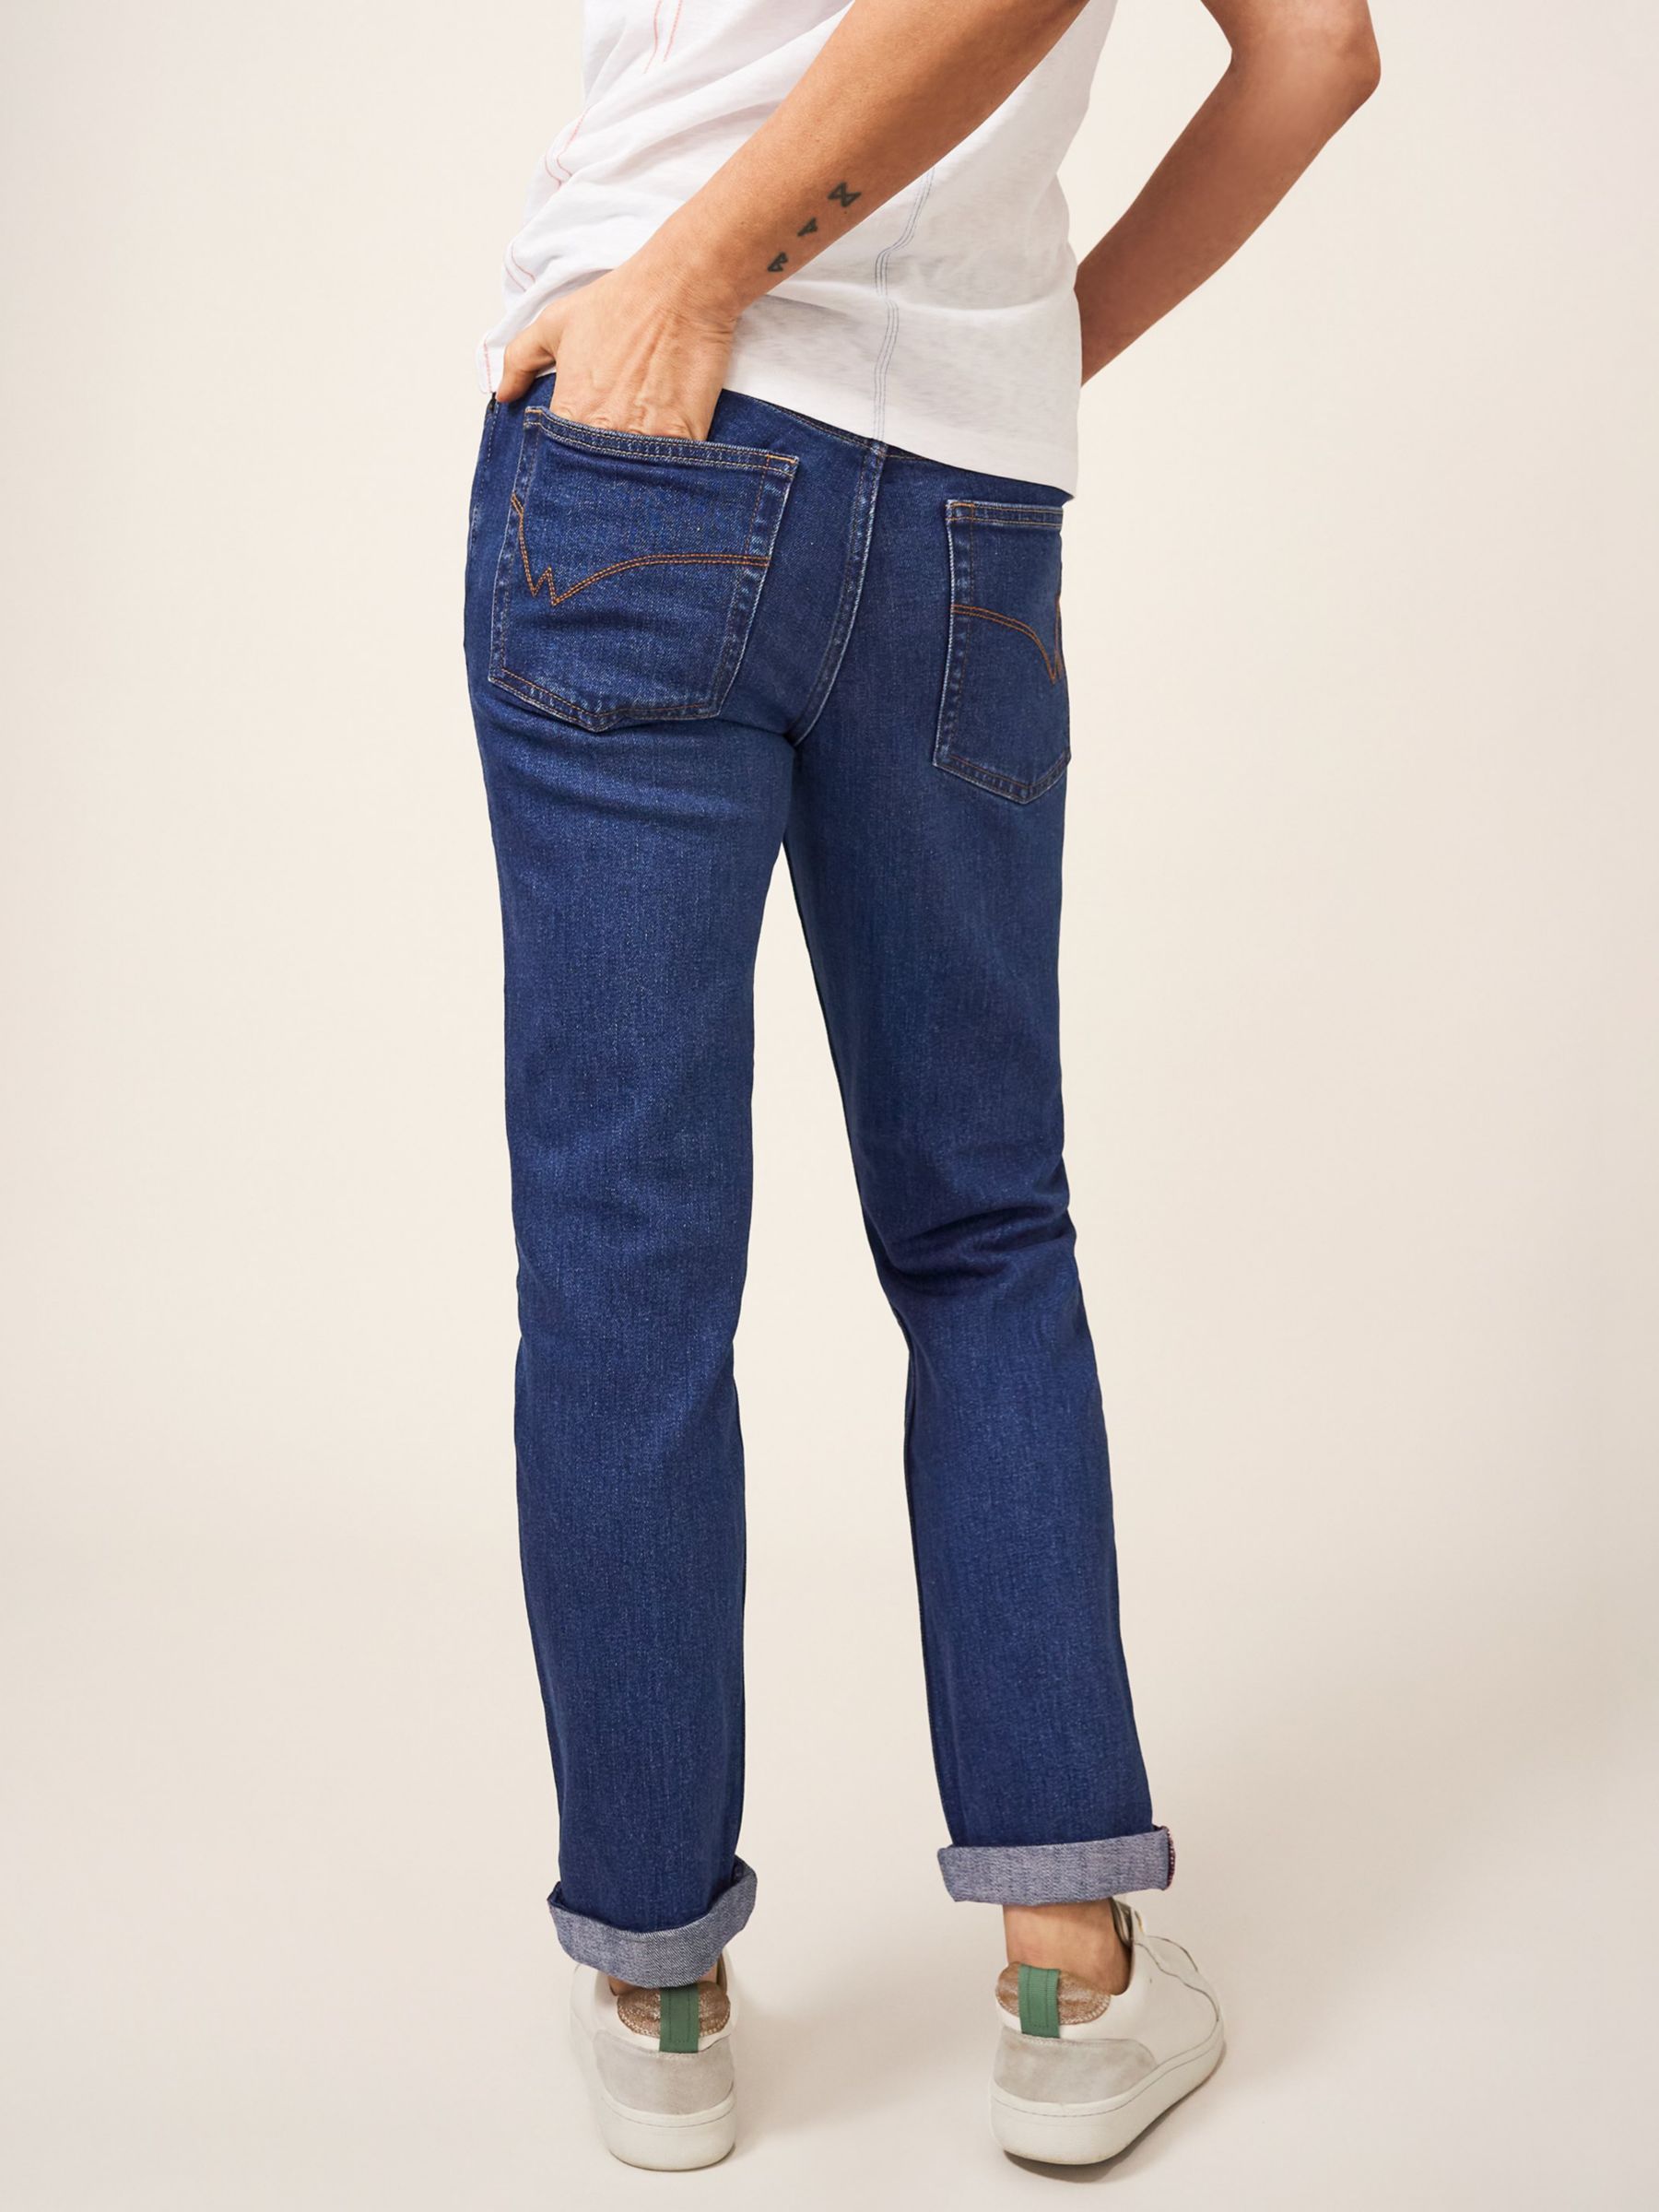 White Stuff Amelia Straight Cropped Jeans at John Lewis & Partners